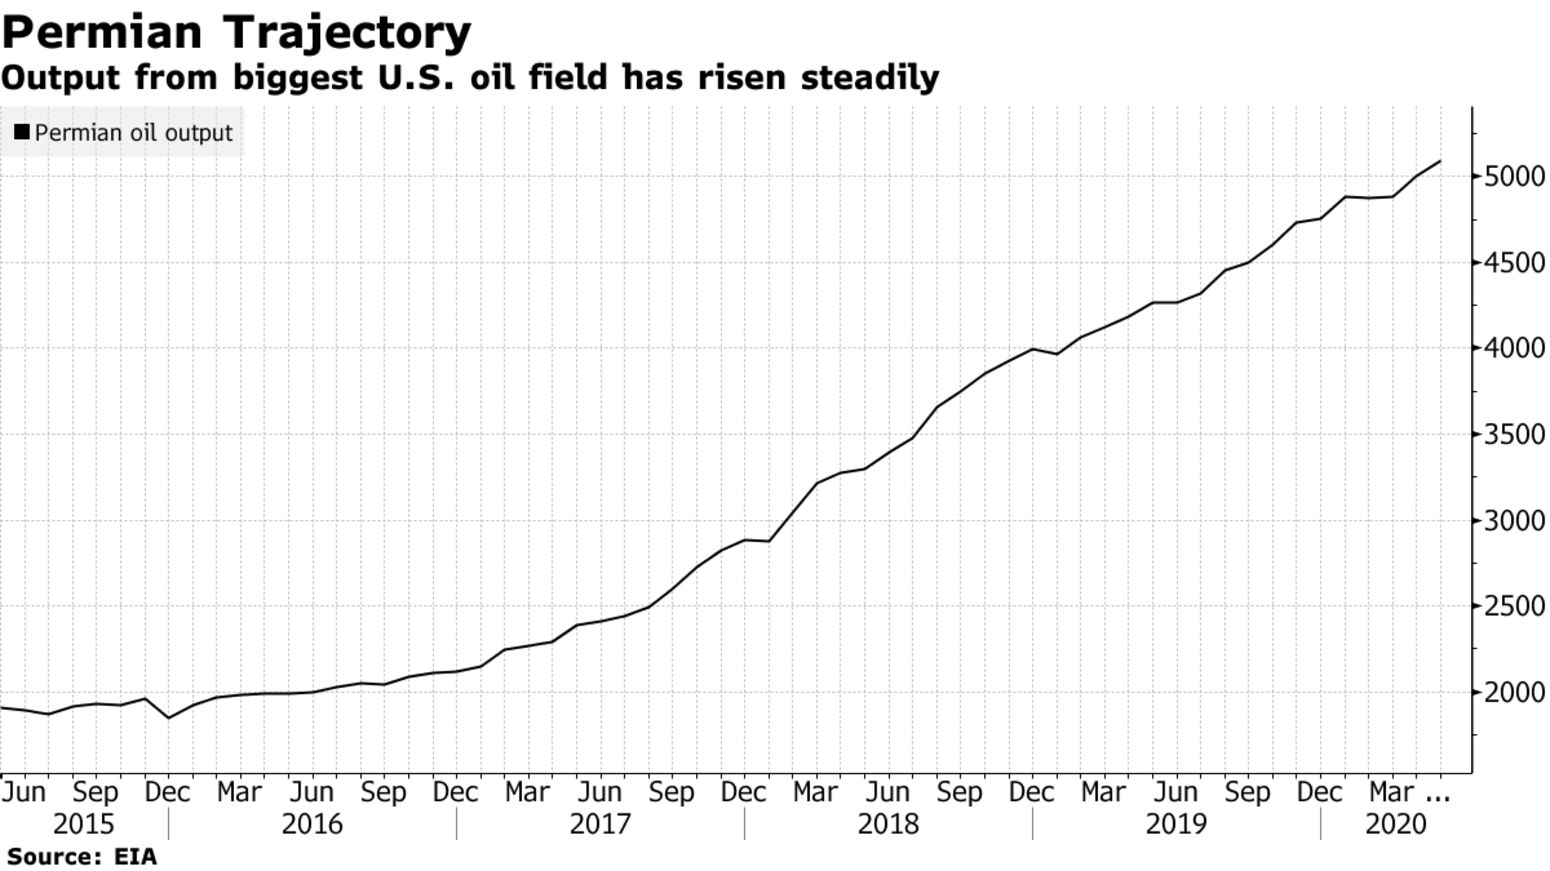 Output from biggest U.S. oil field has risen steadily